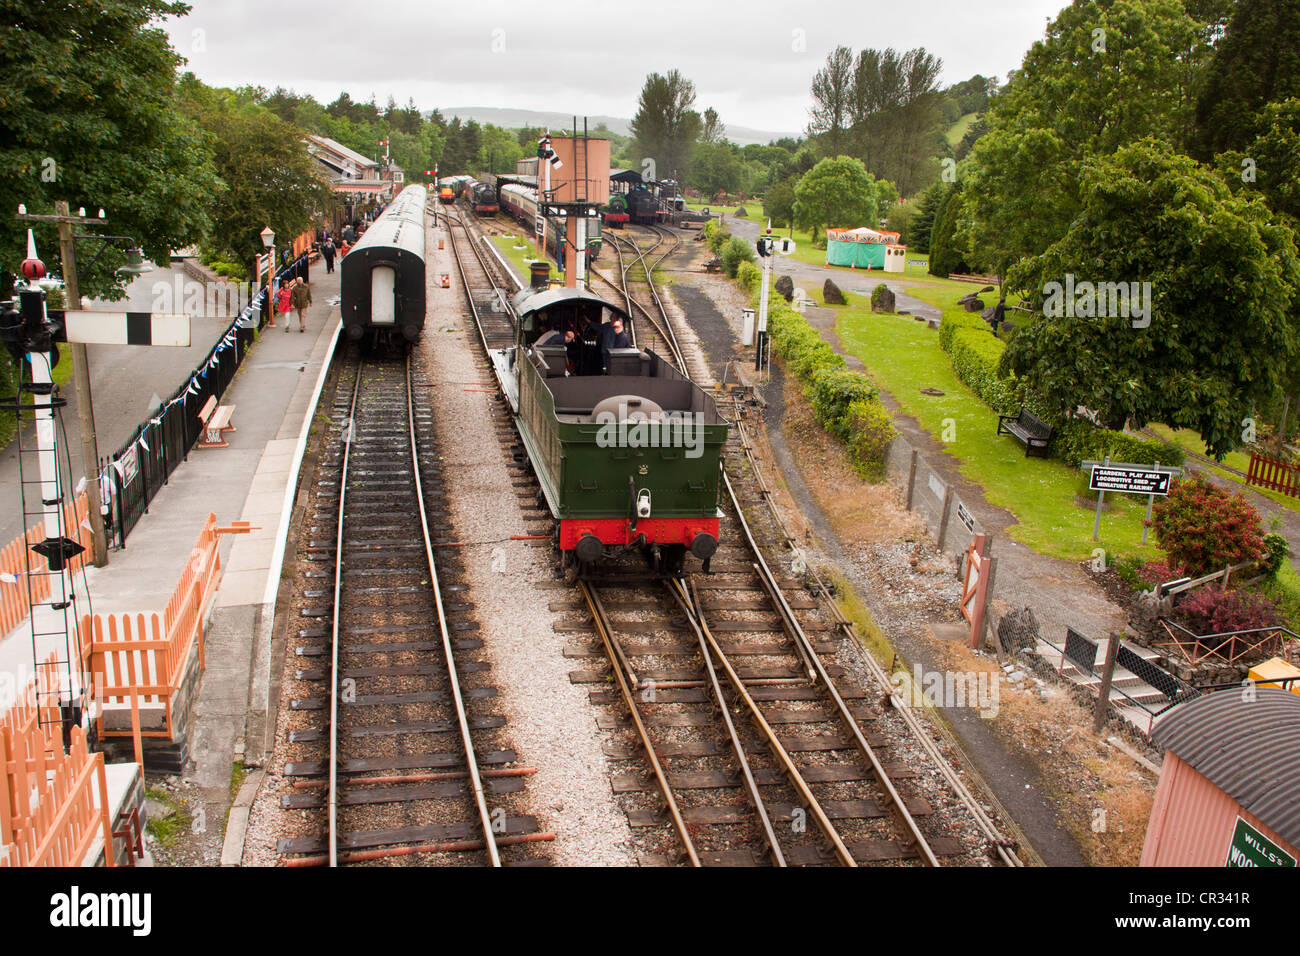 South devon railway line at Buckfastleigh station, 140 yrs old line shut down in 1962, re-opened in 1969 for tourists. Stock Photo